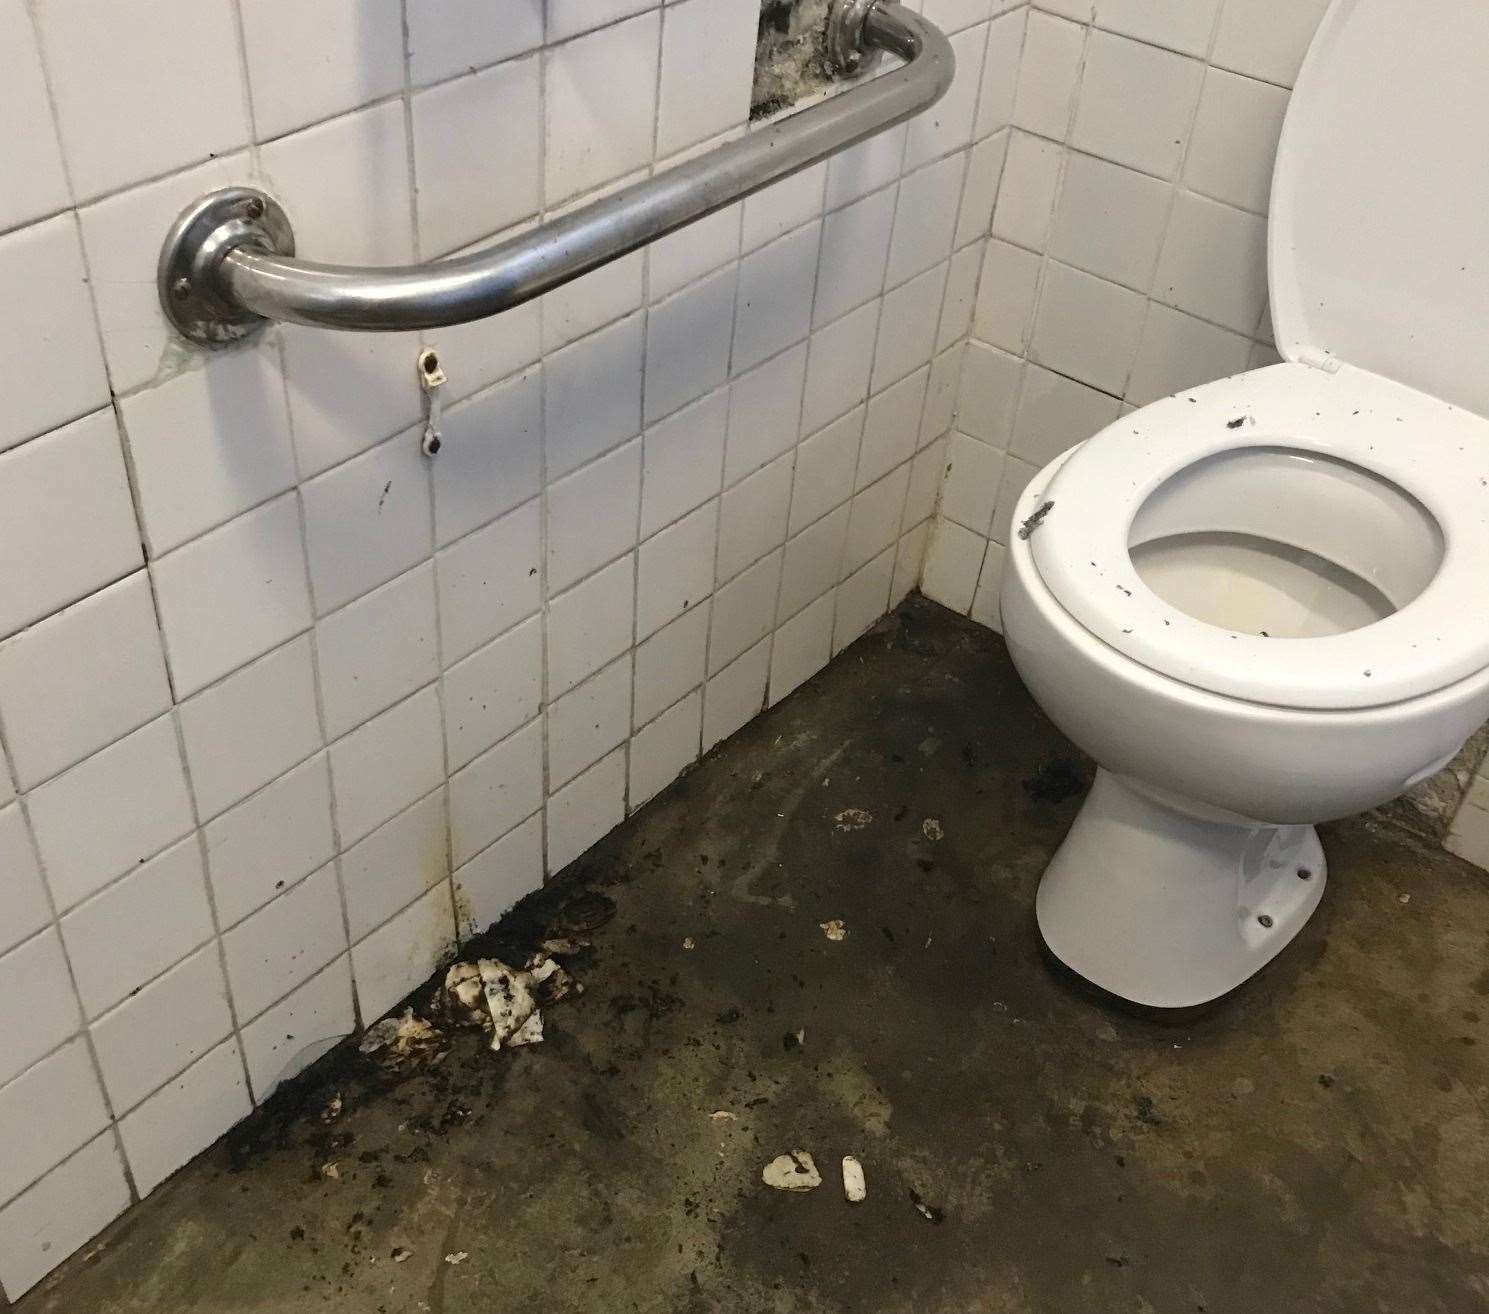 Burnt pieces of toilet roll were strewn over the floor